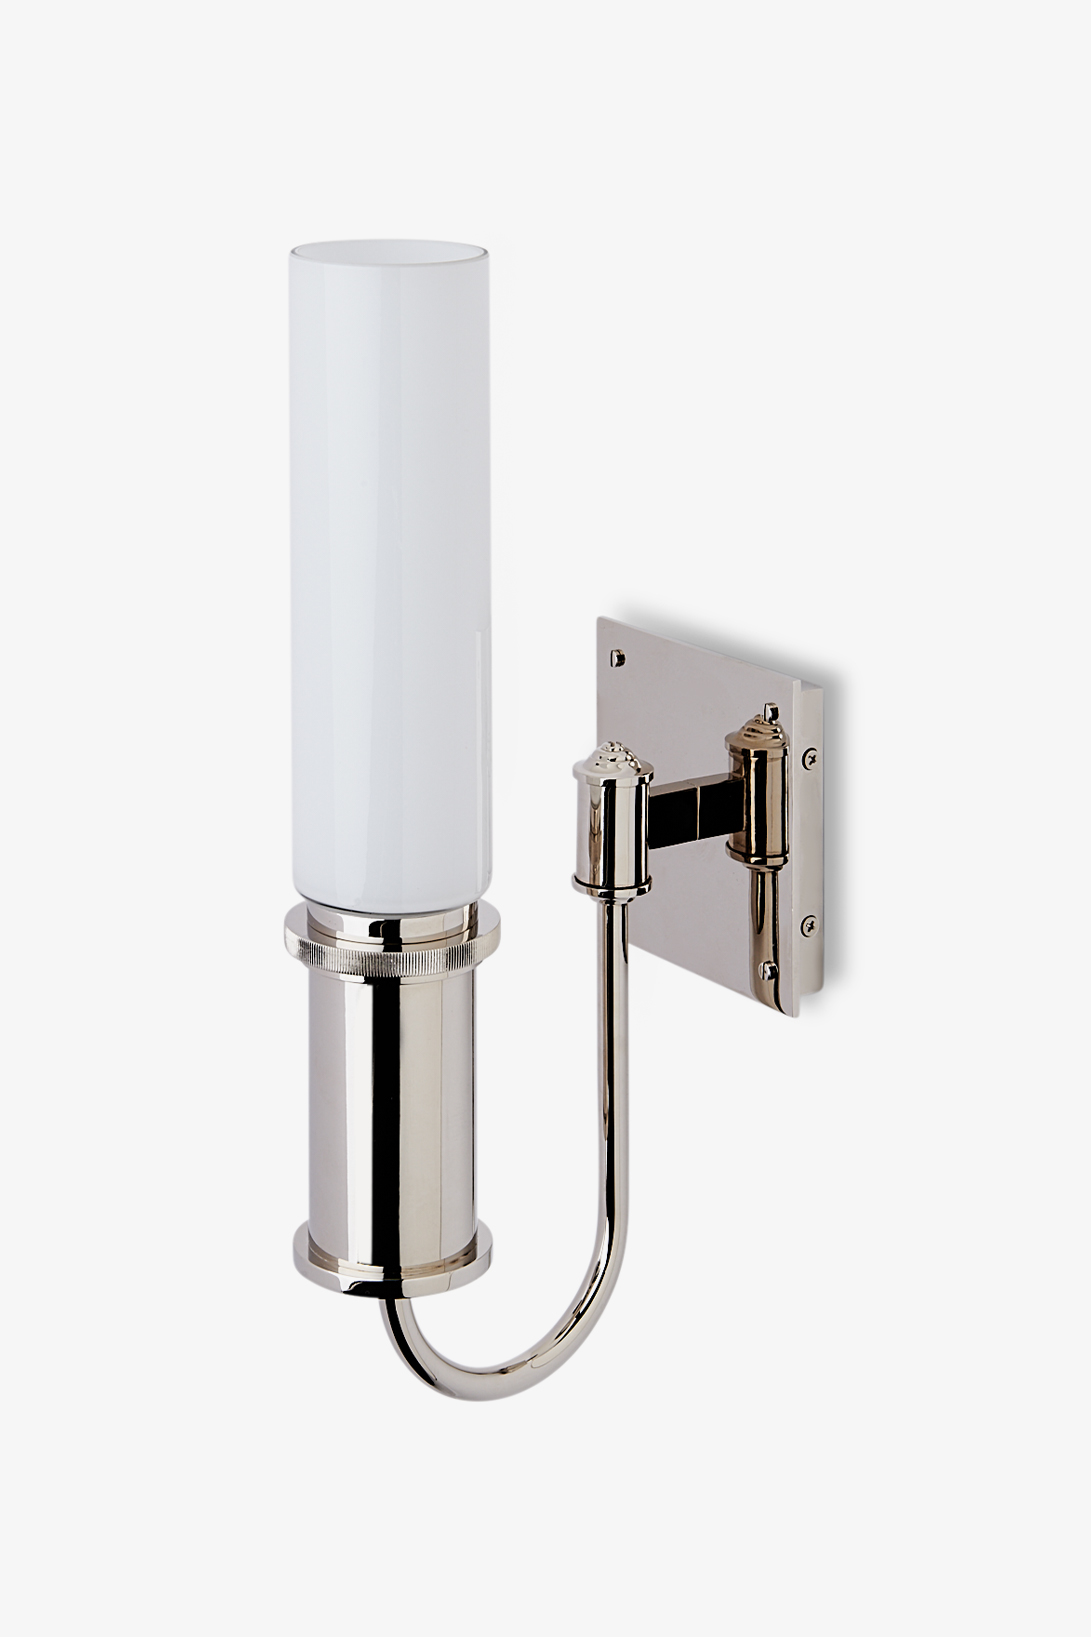 Henry Chronos Wall Mounted Arm Sconce